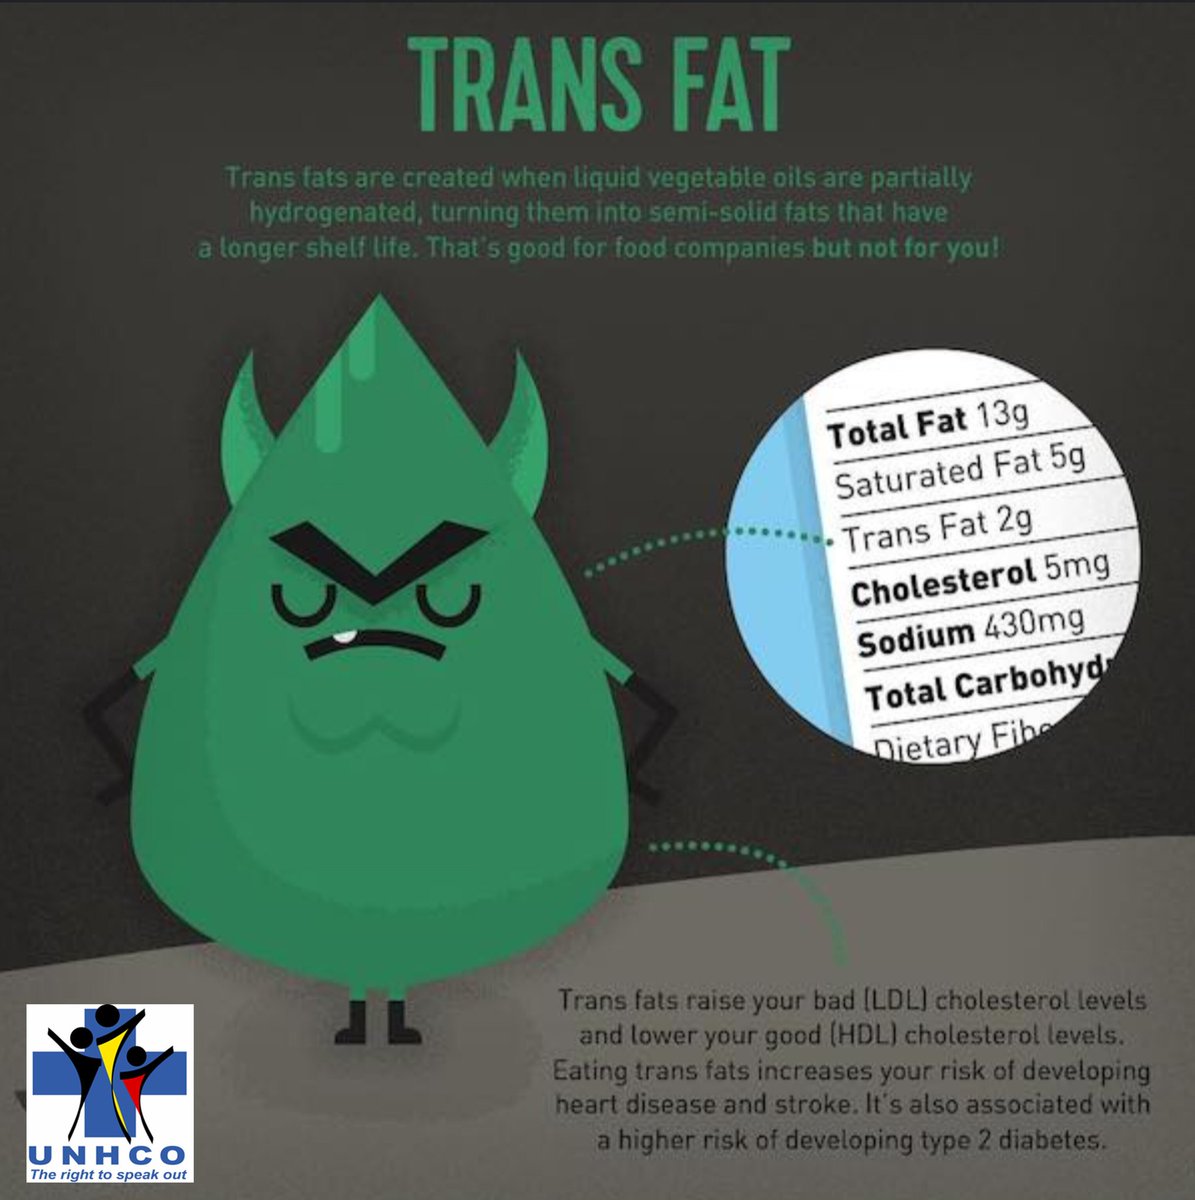 Governments have a central role in creating healthy food environments that enable people to adopt and maintain healthy dietary practicesto reduce trans fat, with the goal of eliminating industrially produced. #RegulateTransFatsNOW #TransFatFreeUG #TransFatFreeEAC